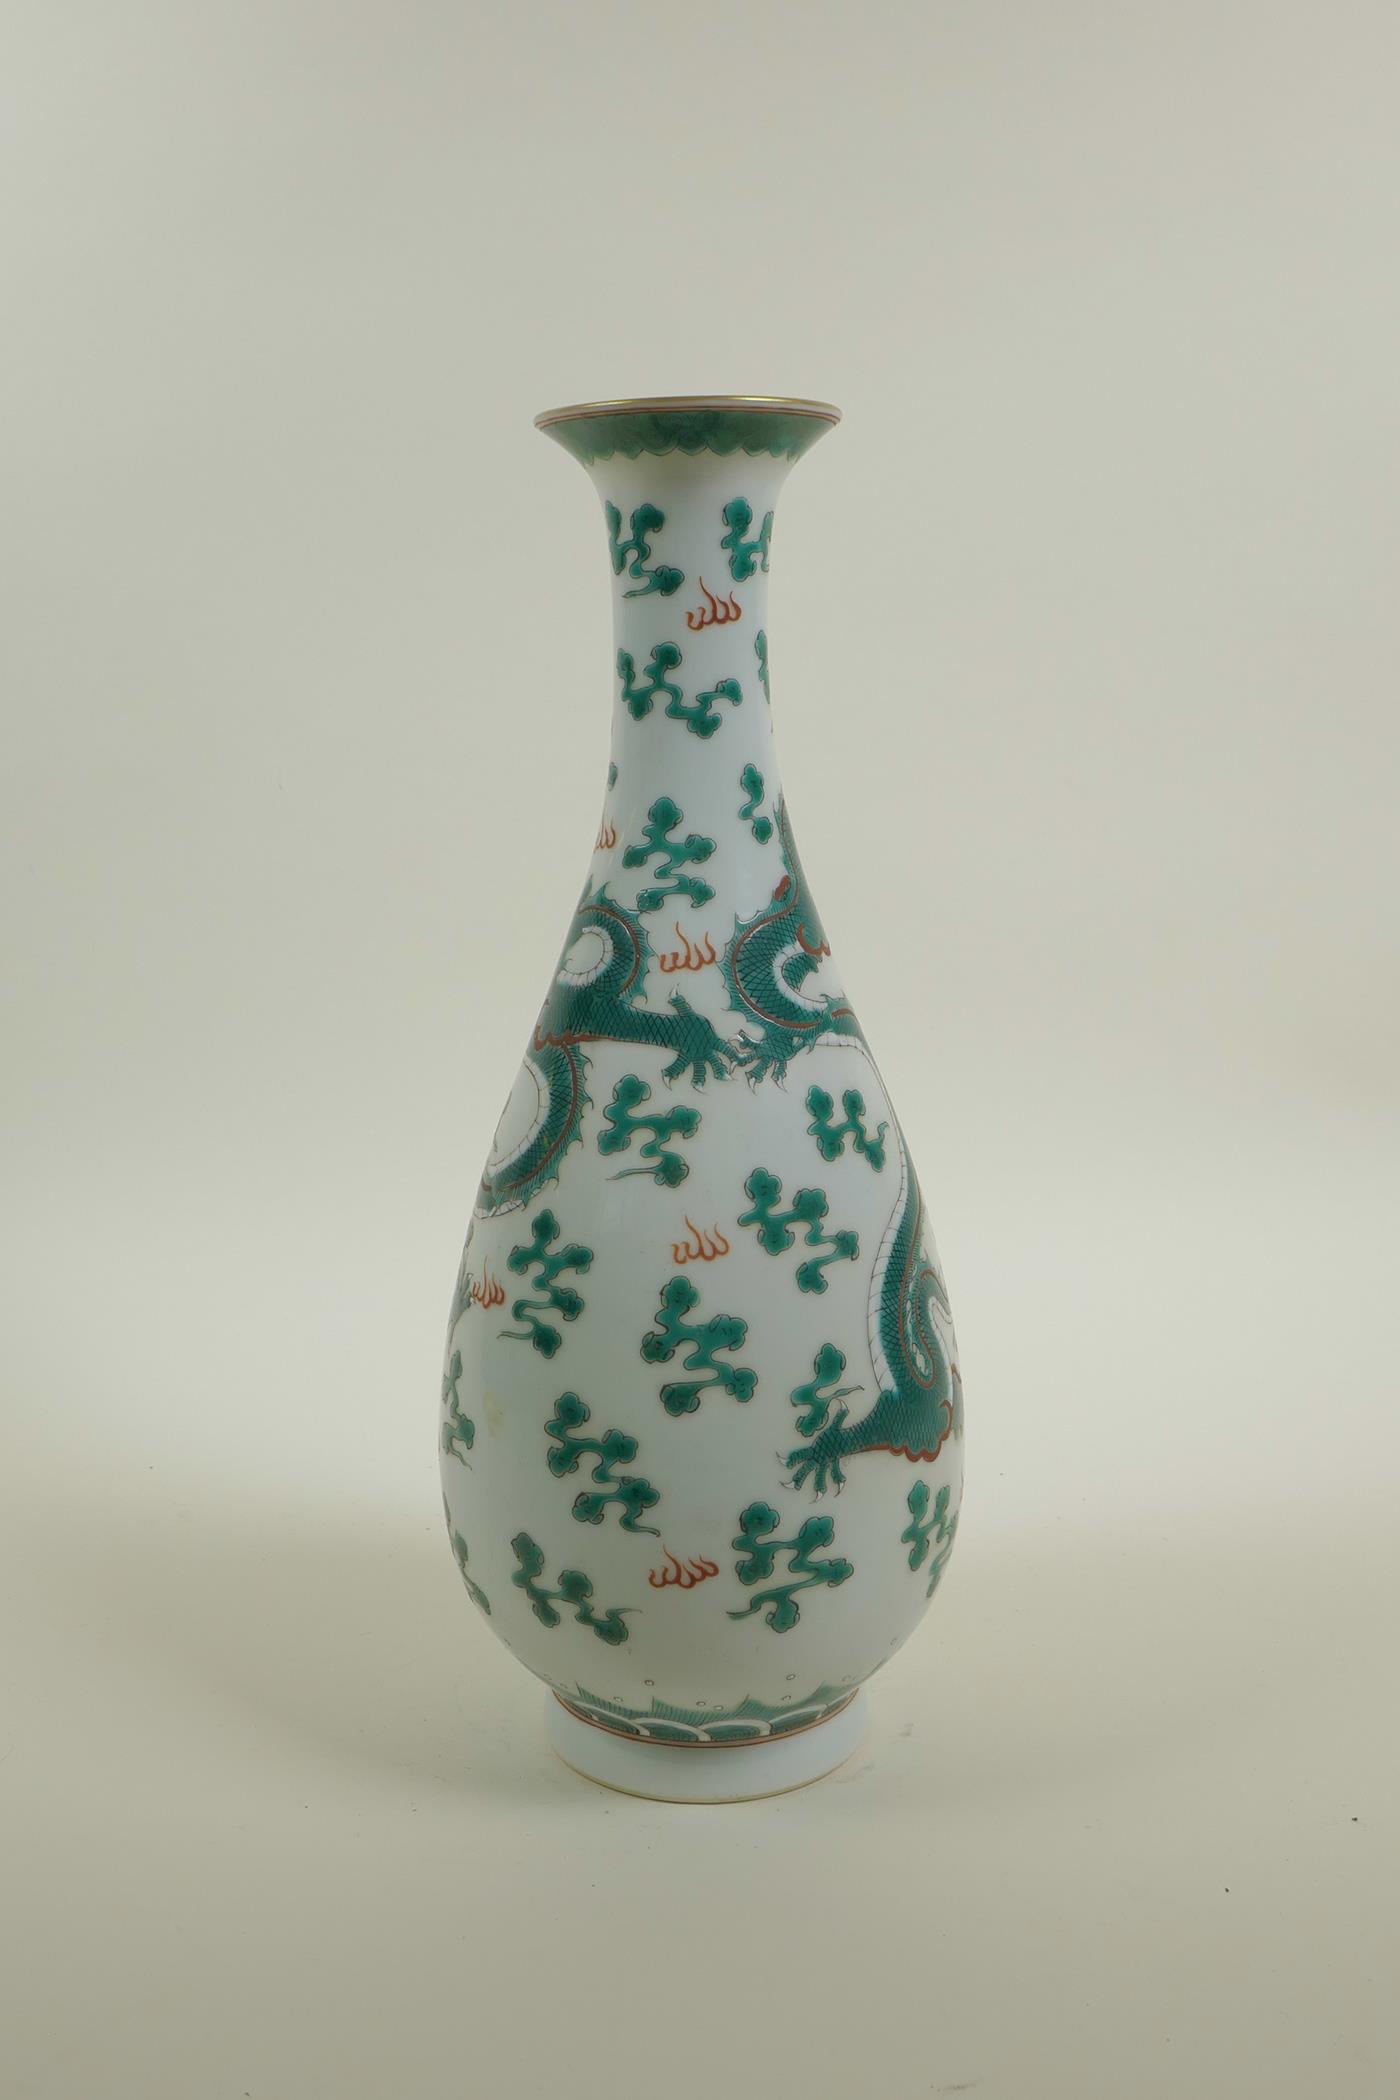 A Chinese late C19th/early C20th slender necked porcelain vase decorated with green enamel dragons - Image 3 of 4